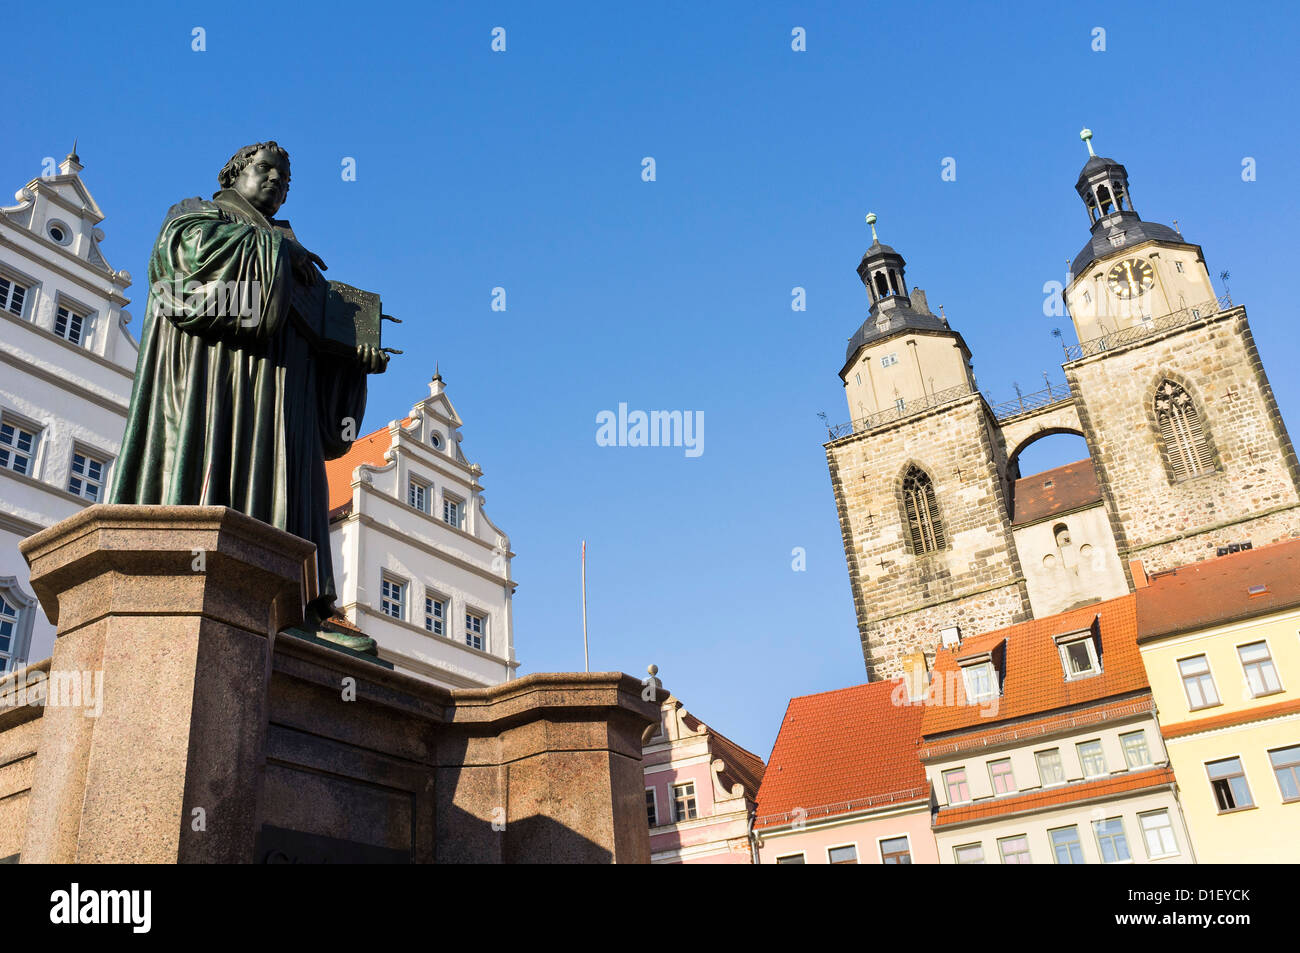 Luther Memorial on the market square, Wittenberg, Saxony-Anhalt, Germany Stock Photo